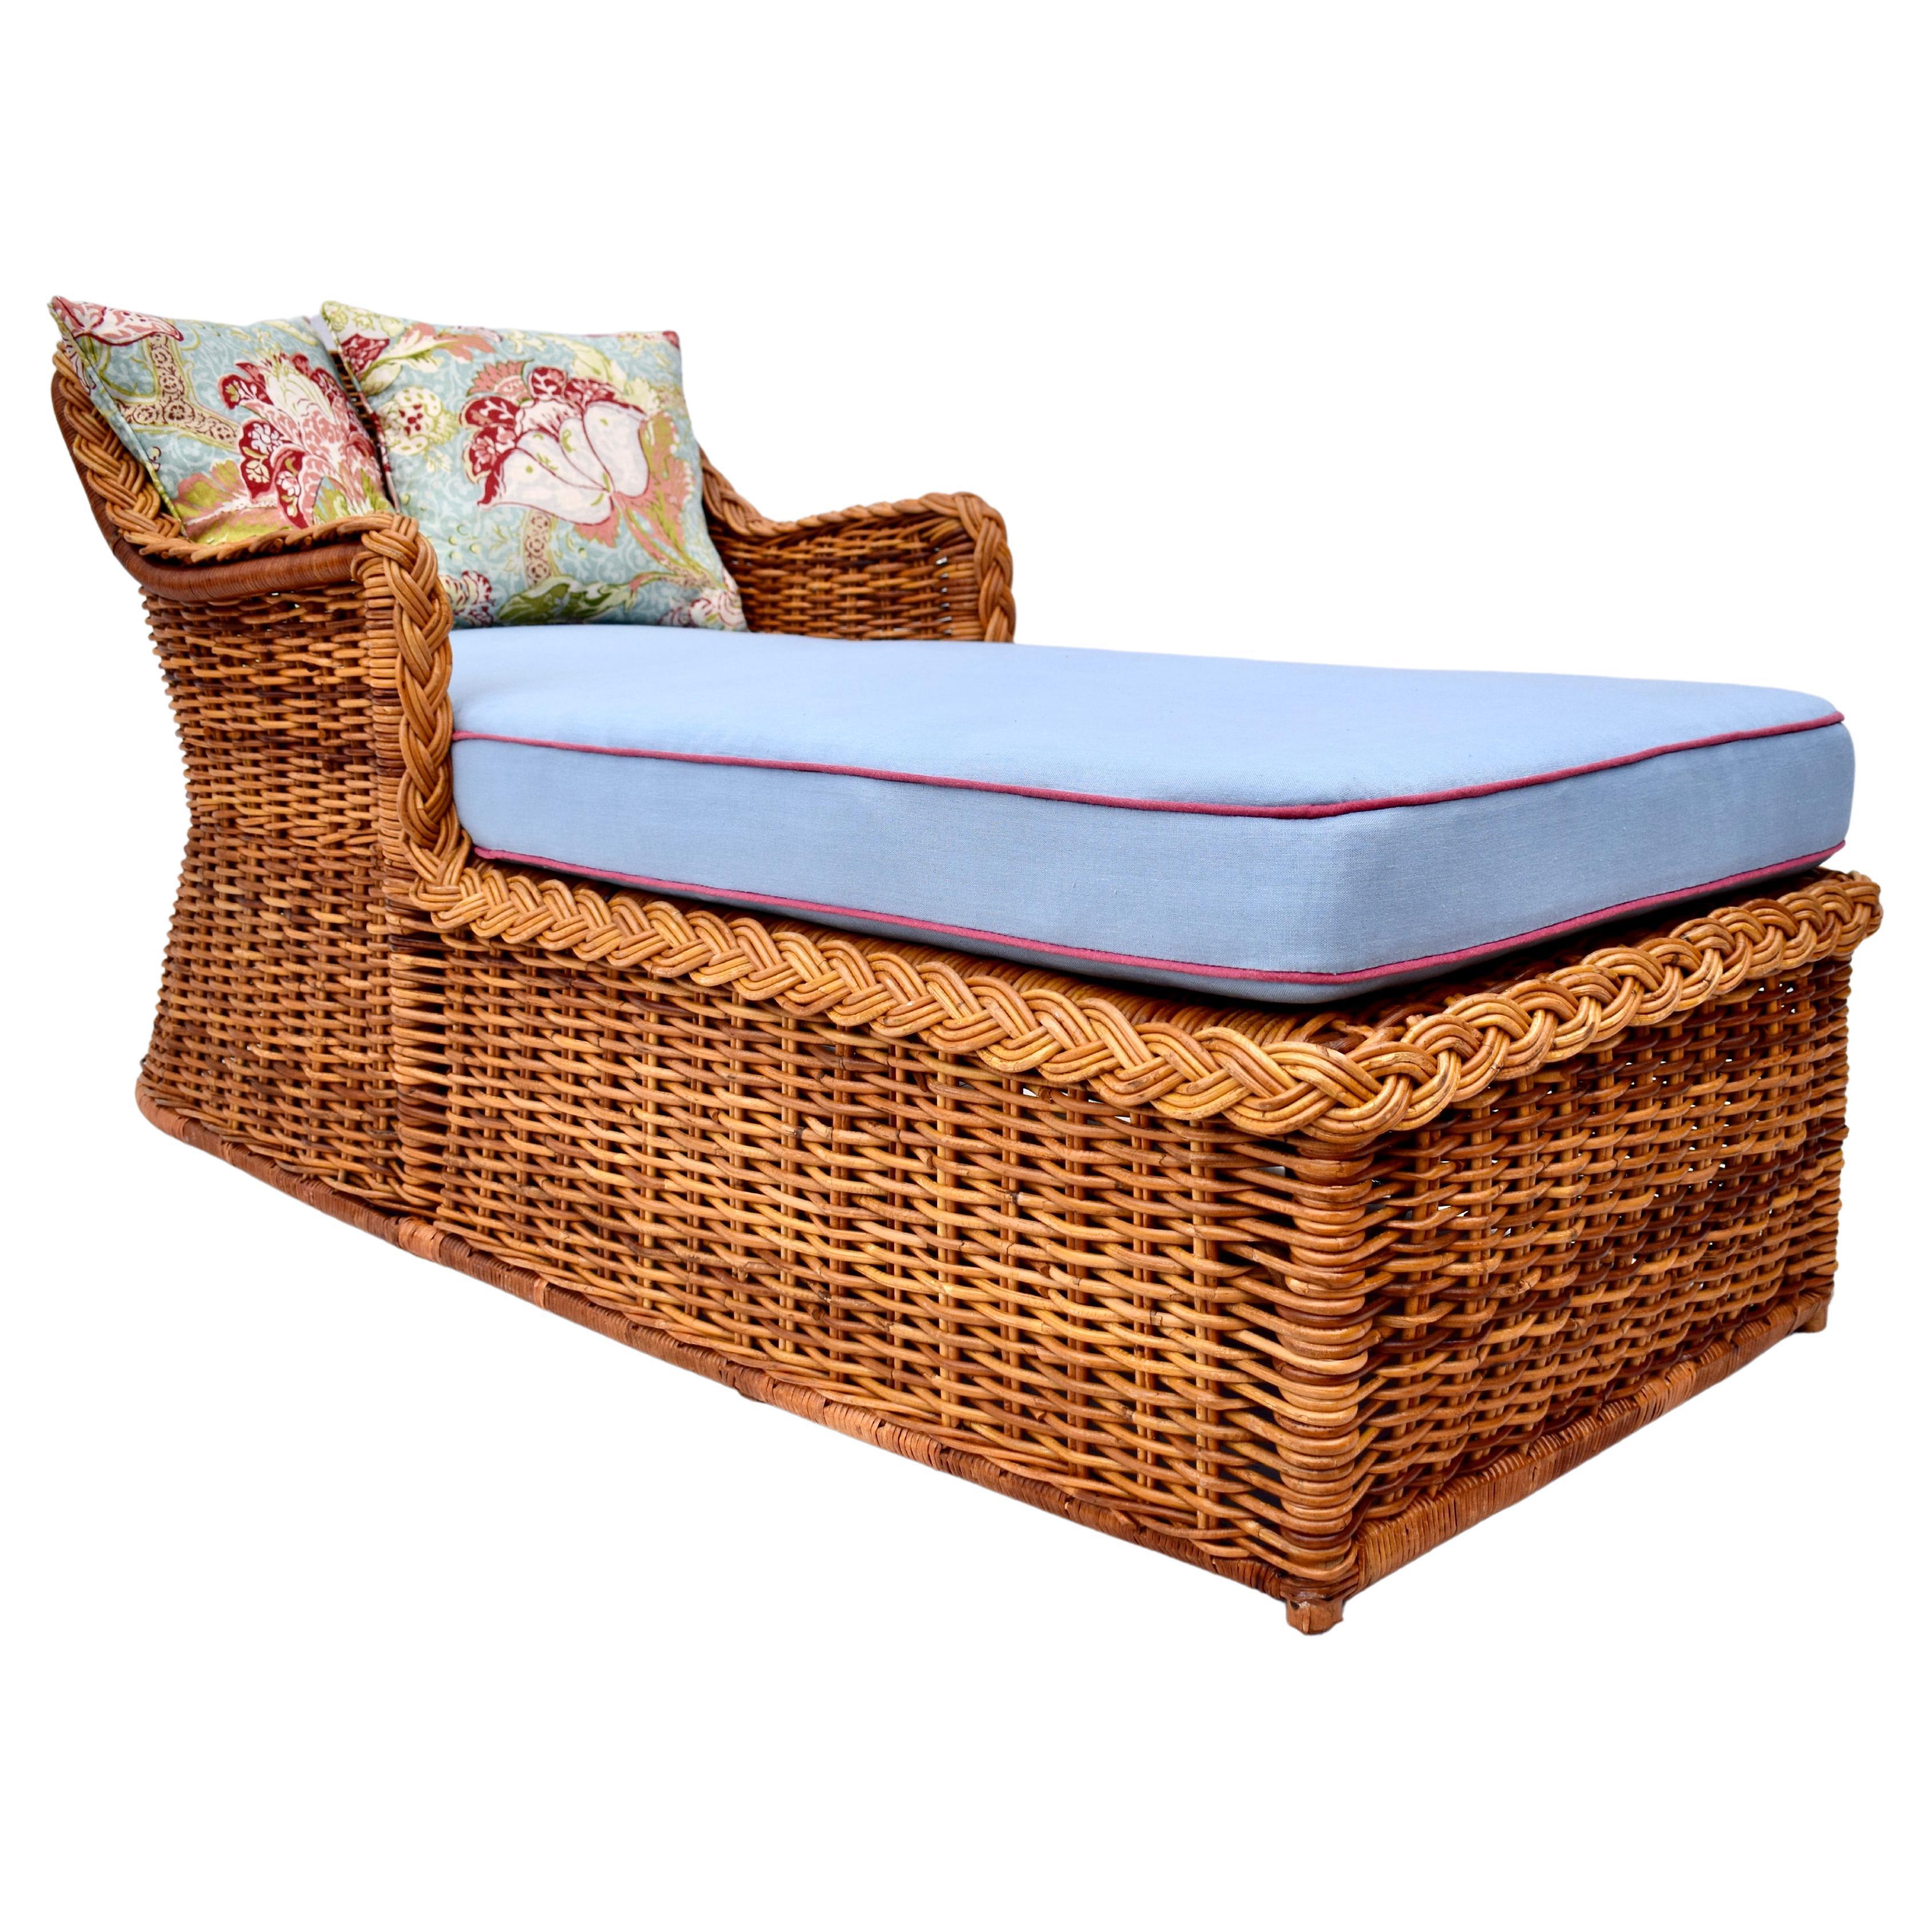 Mid-Century Modern 1960's Michael Taylor Braided Wicker Rattan Chaise Lounge Daybed For Sale